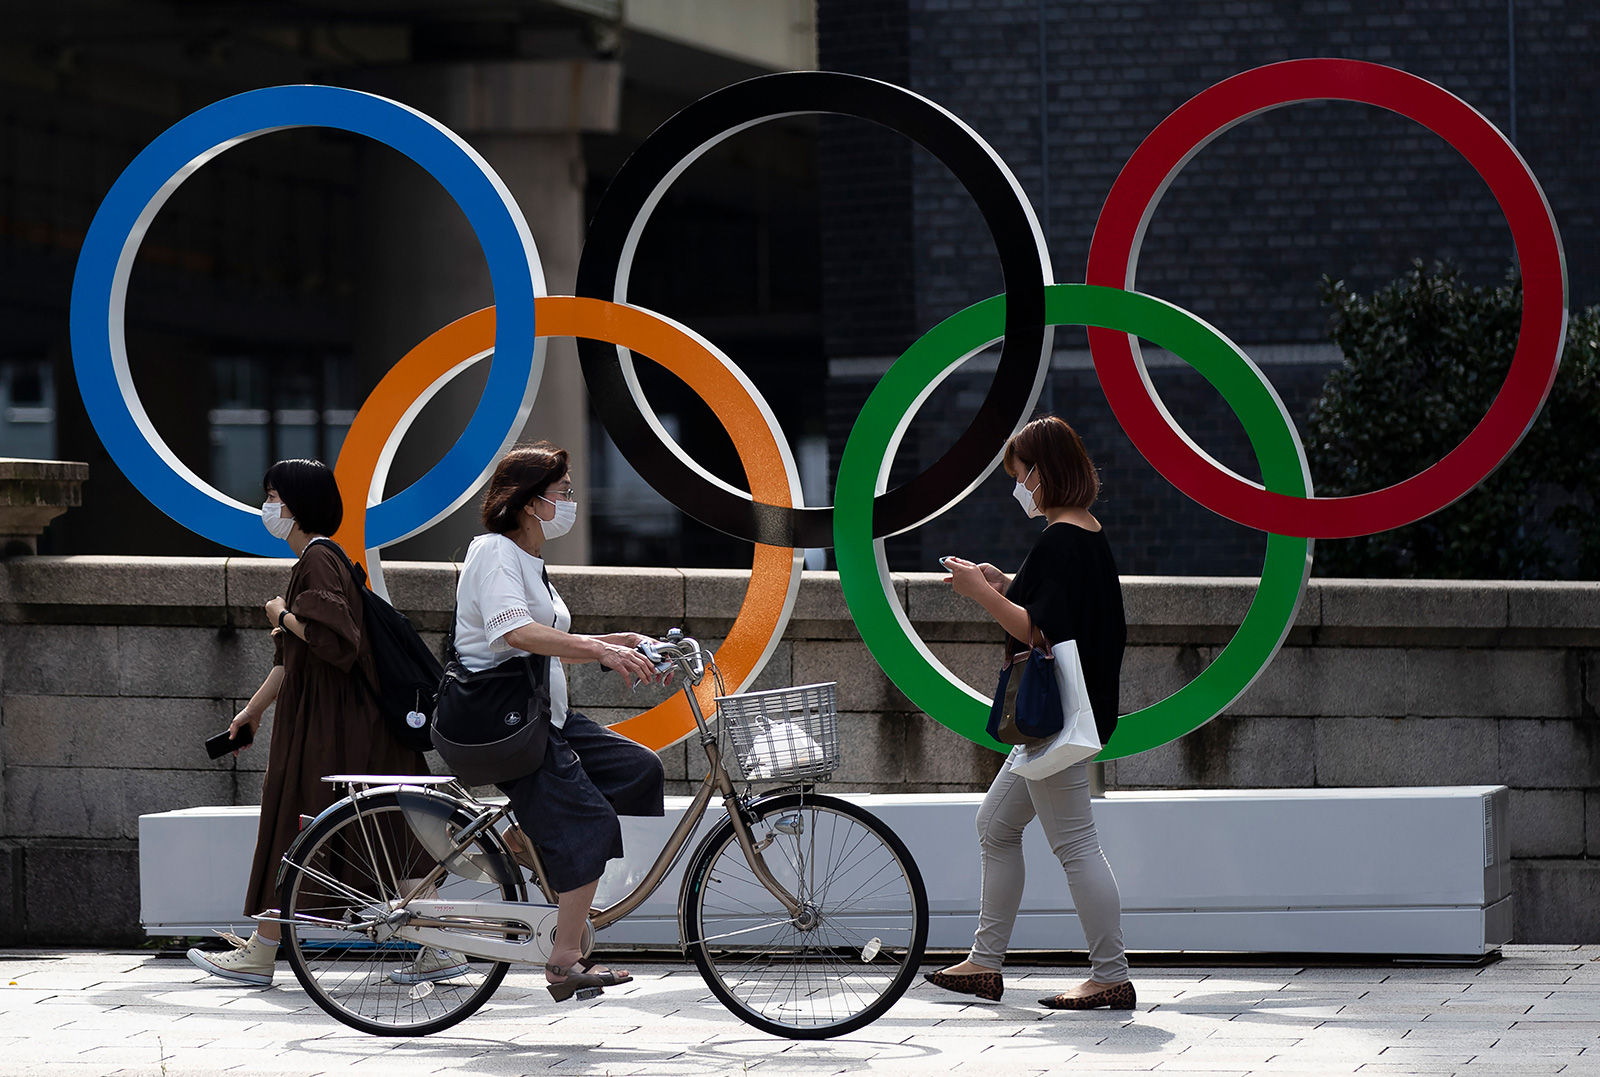 People walk by the Olympic rings installed by the Nippon Bashi bridge in Tokyo on Thursday, July 15.